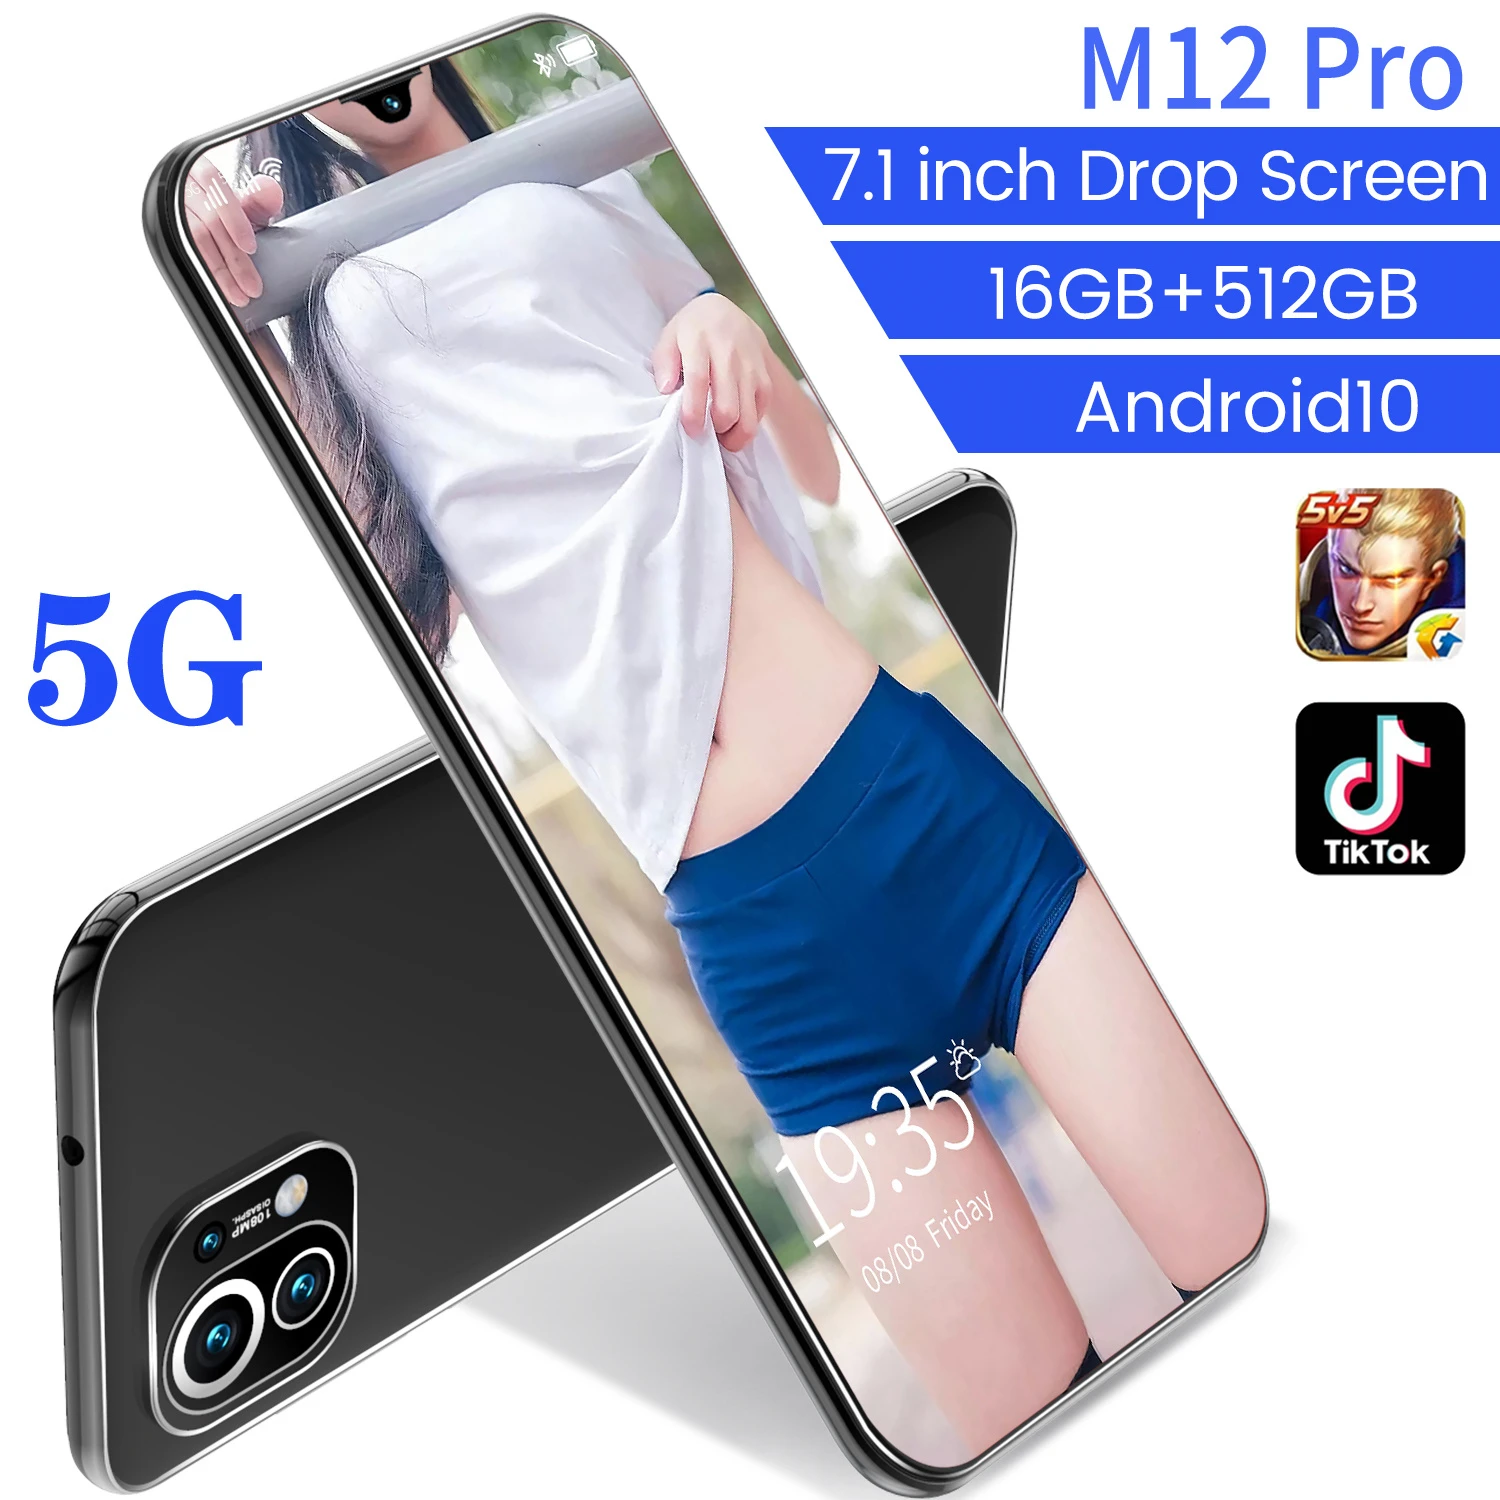 M12 Pro Min Laptop Android 7.1 Inch 16GB 512GB 6800mAh Global Version Dual SIM 5G 10 Core Bluetooth 24MP 48MP Face ID Tablet